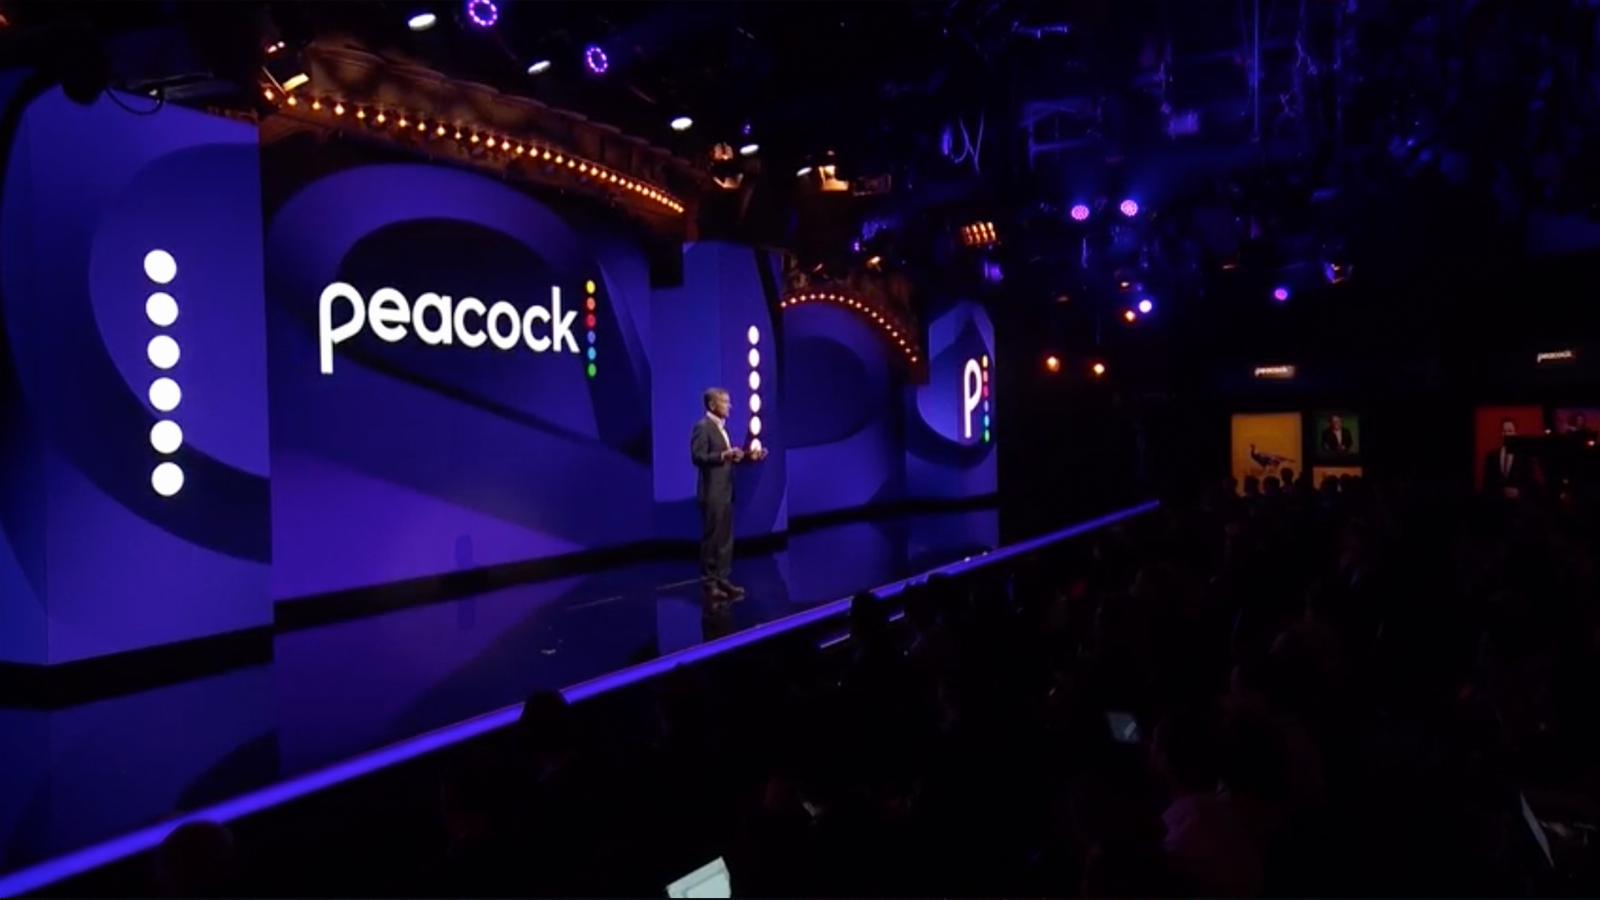 Peacock tops 20M subscribers in Q4 as losses widen